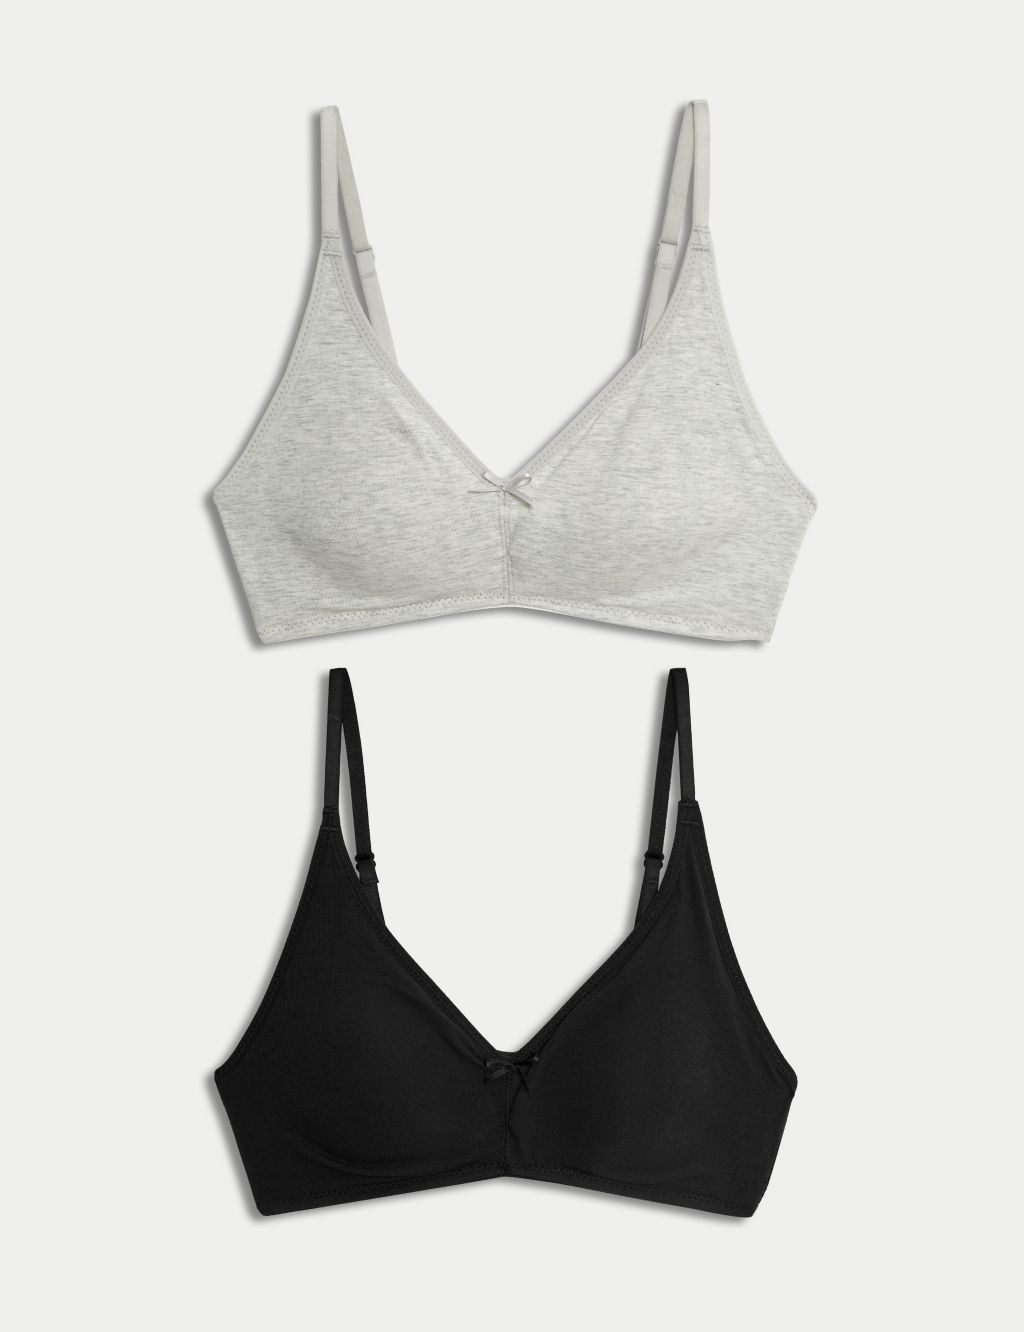 BNWT Marks & Spencer Angel Girls Non Wired Padded Bra Twin Pack